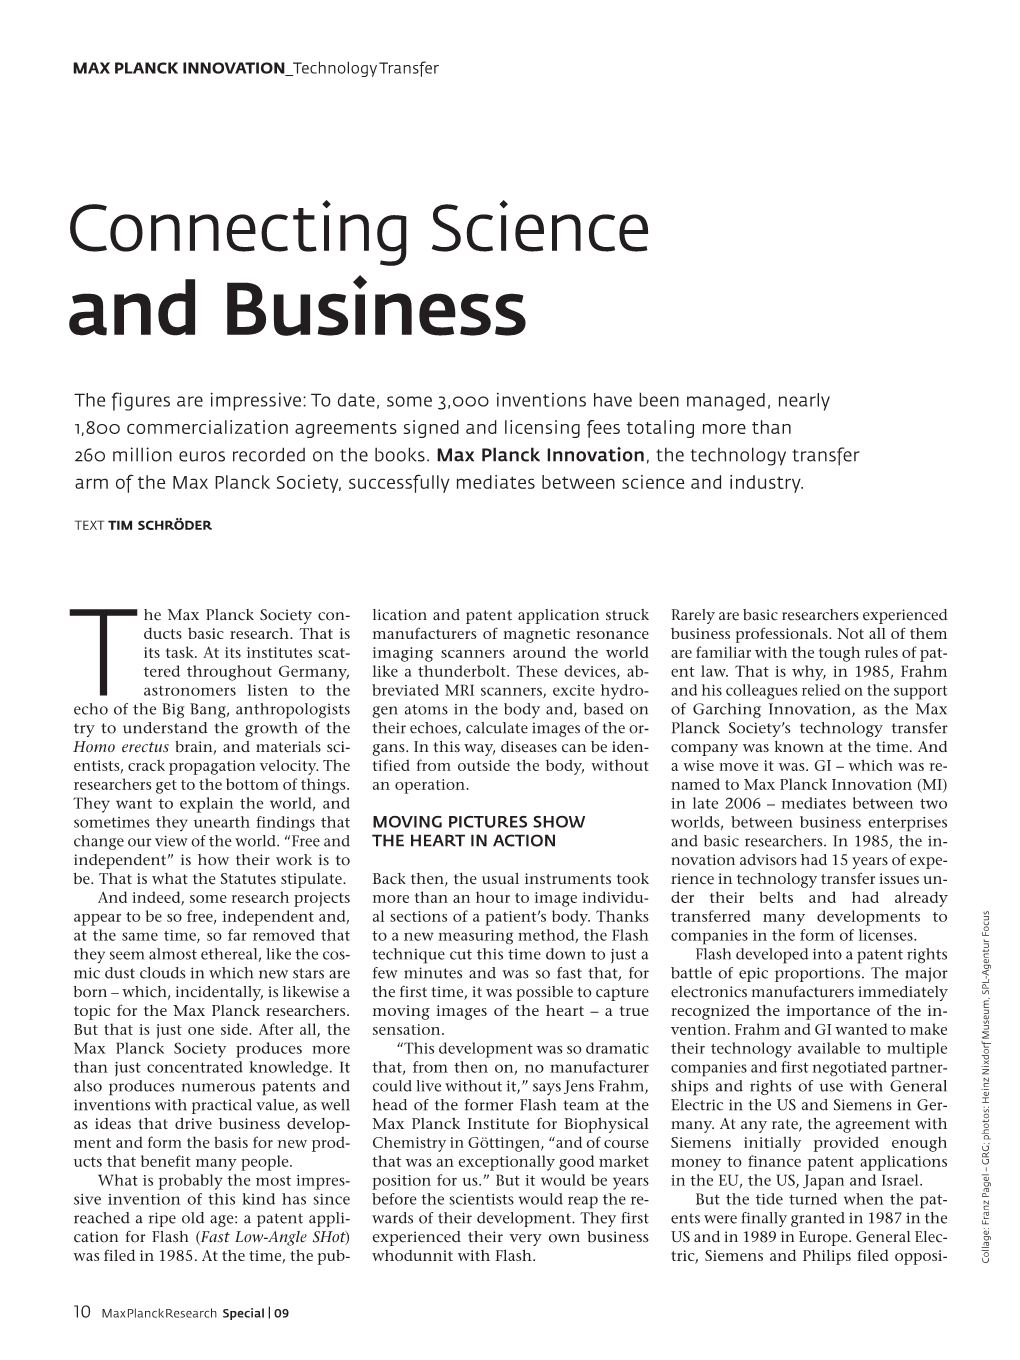 Connecting Science and Business